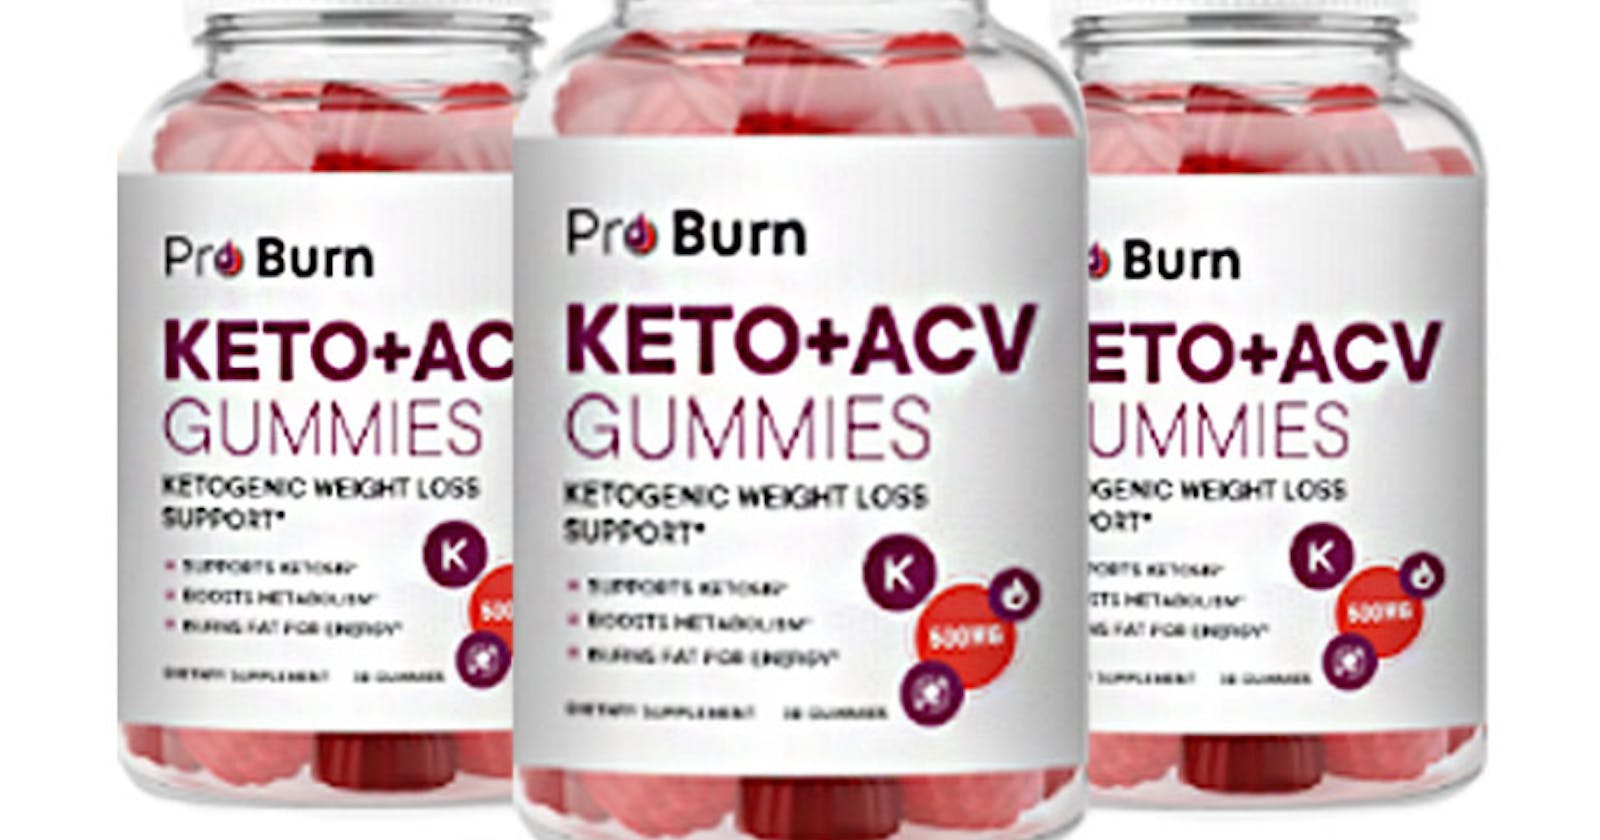 Pro Burn Keto ACV Gummies Reviews, Side Effects, Cost, Price, Scam, Near Me, Amazon & Where To Buy?